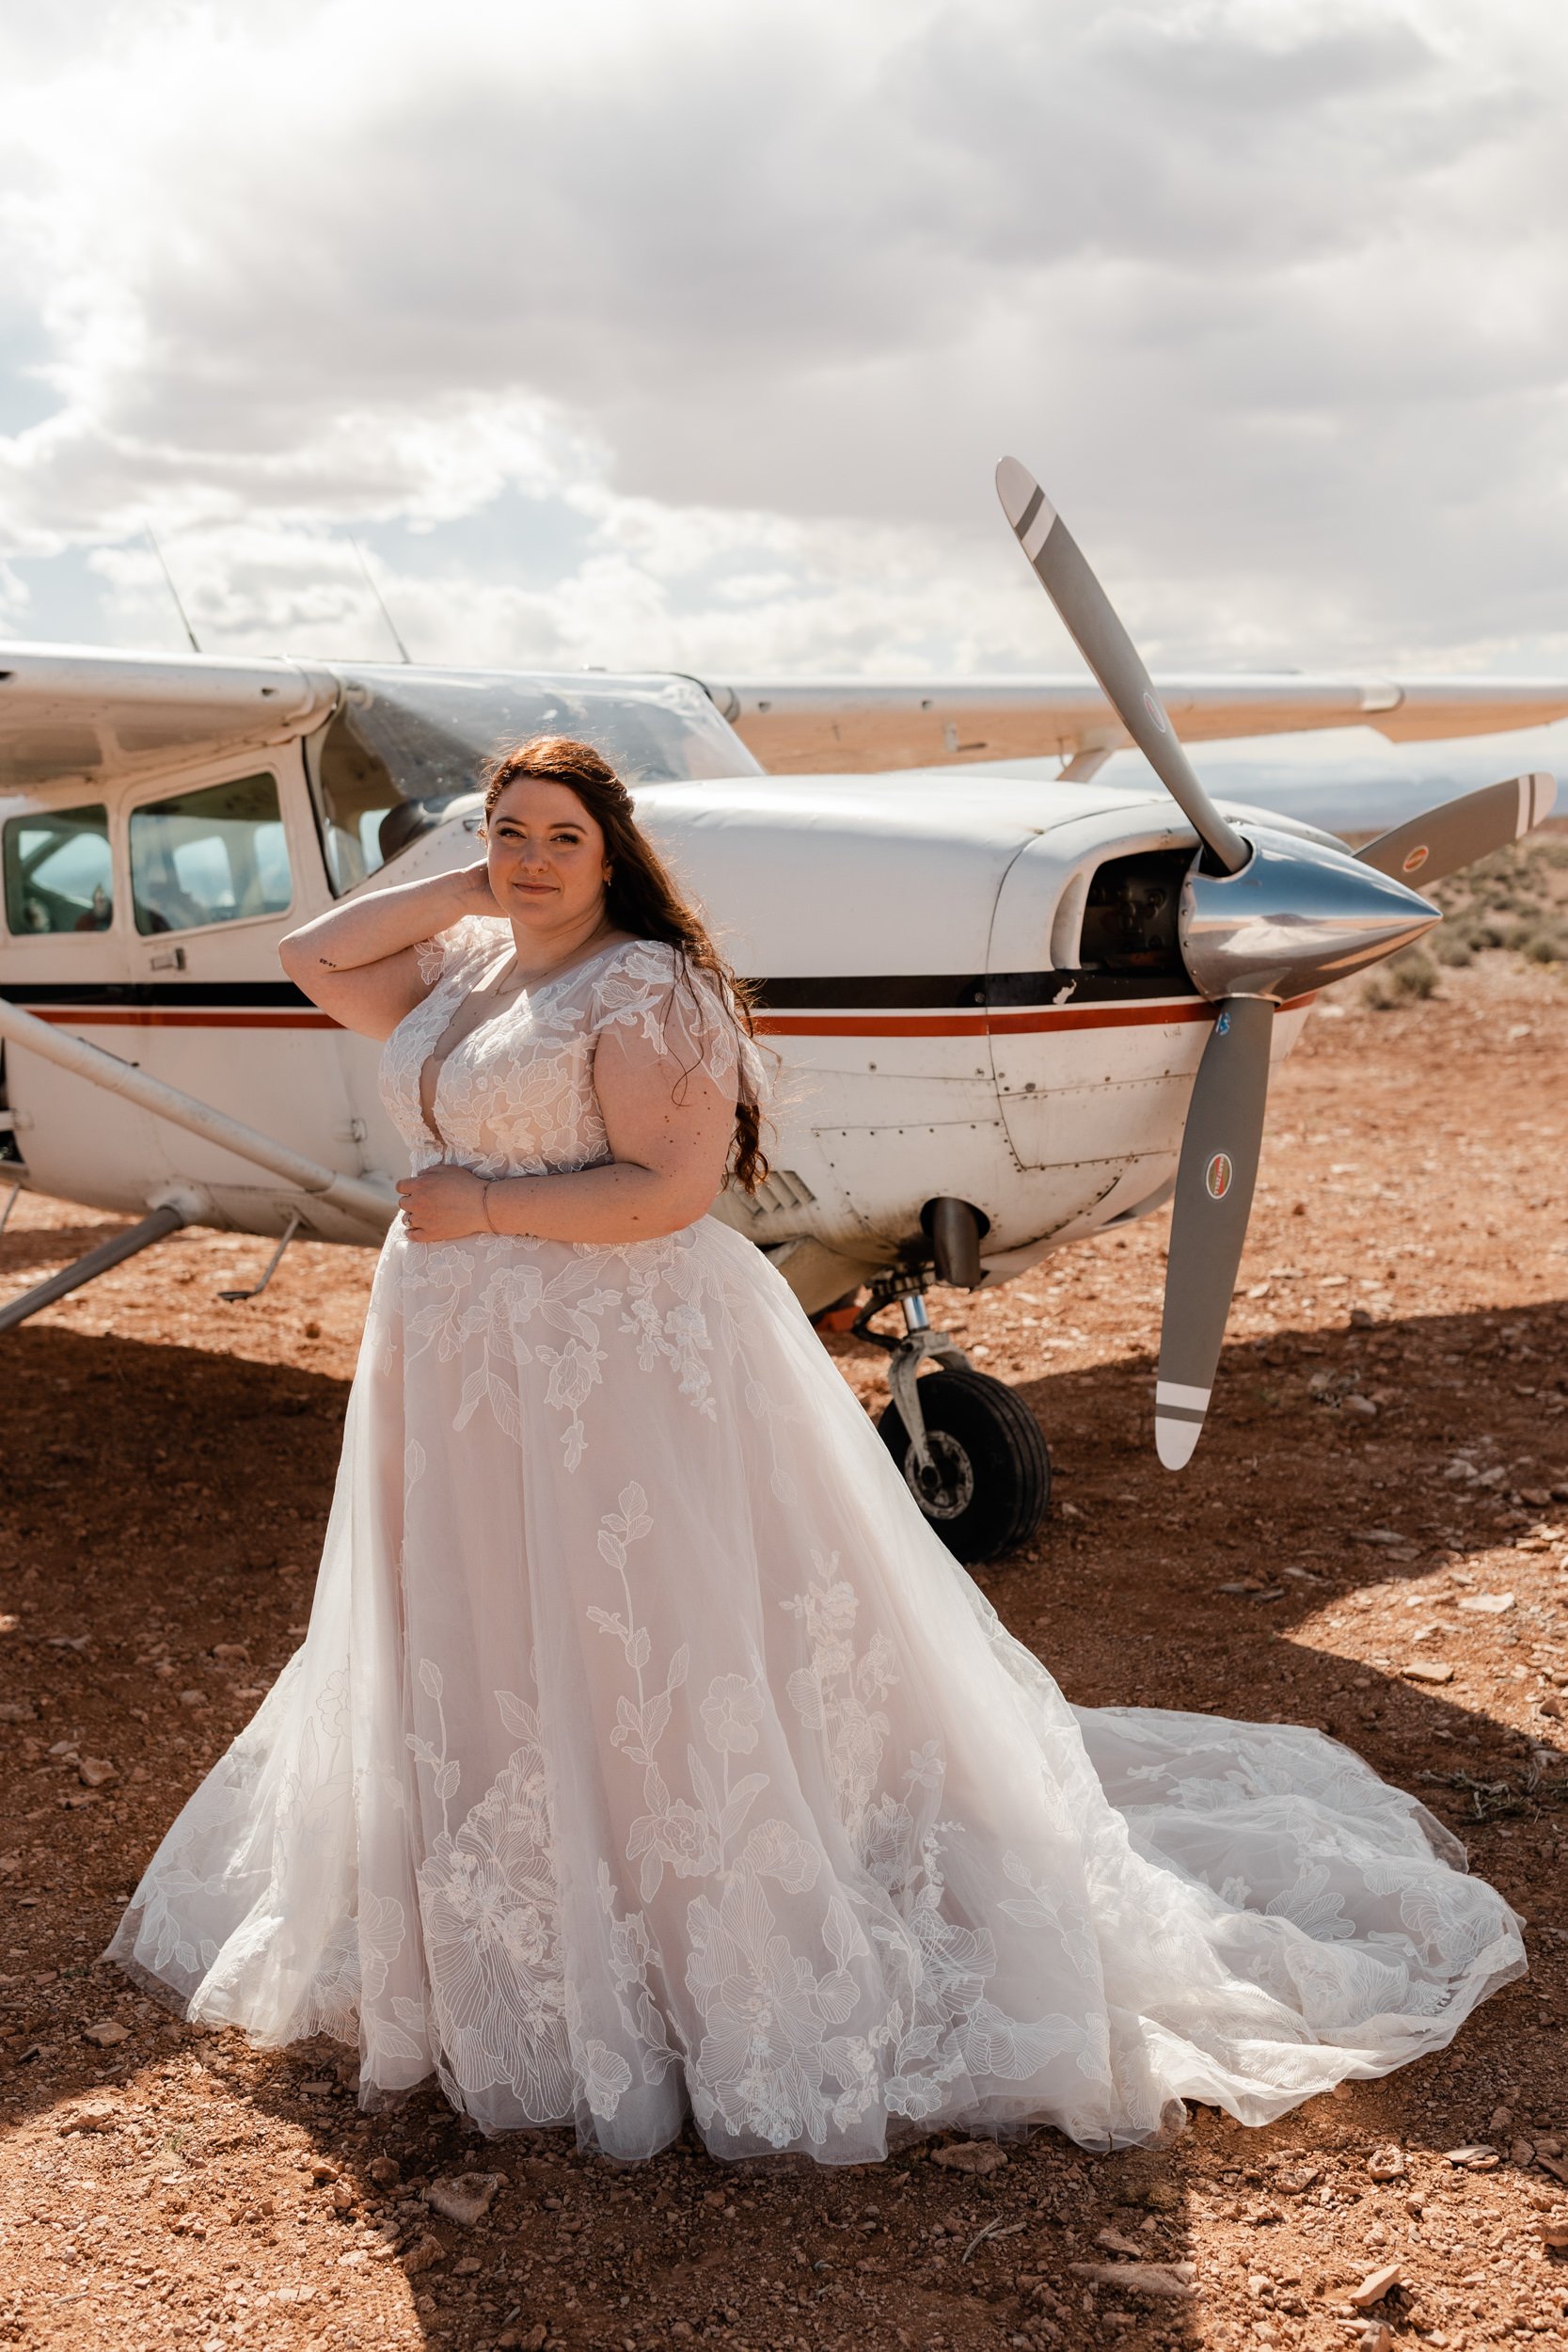 Moab, Utah Backcountry Airplane Elopement | The Hearnes Adventure Photography